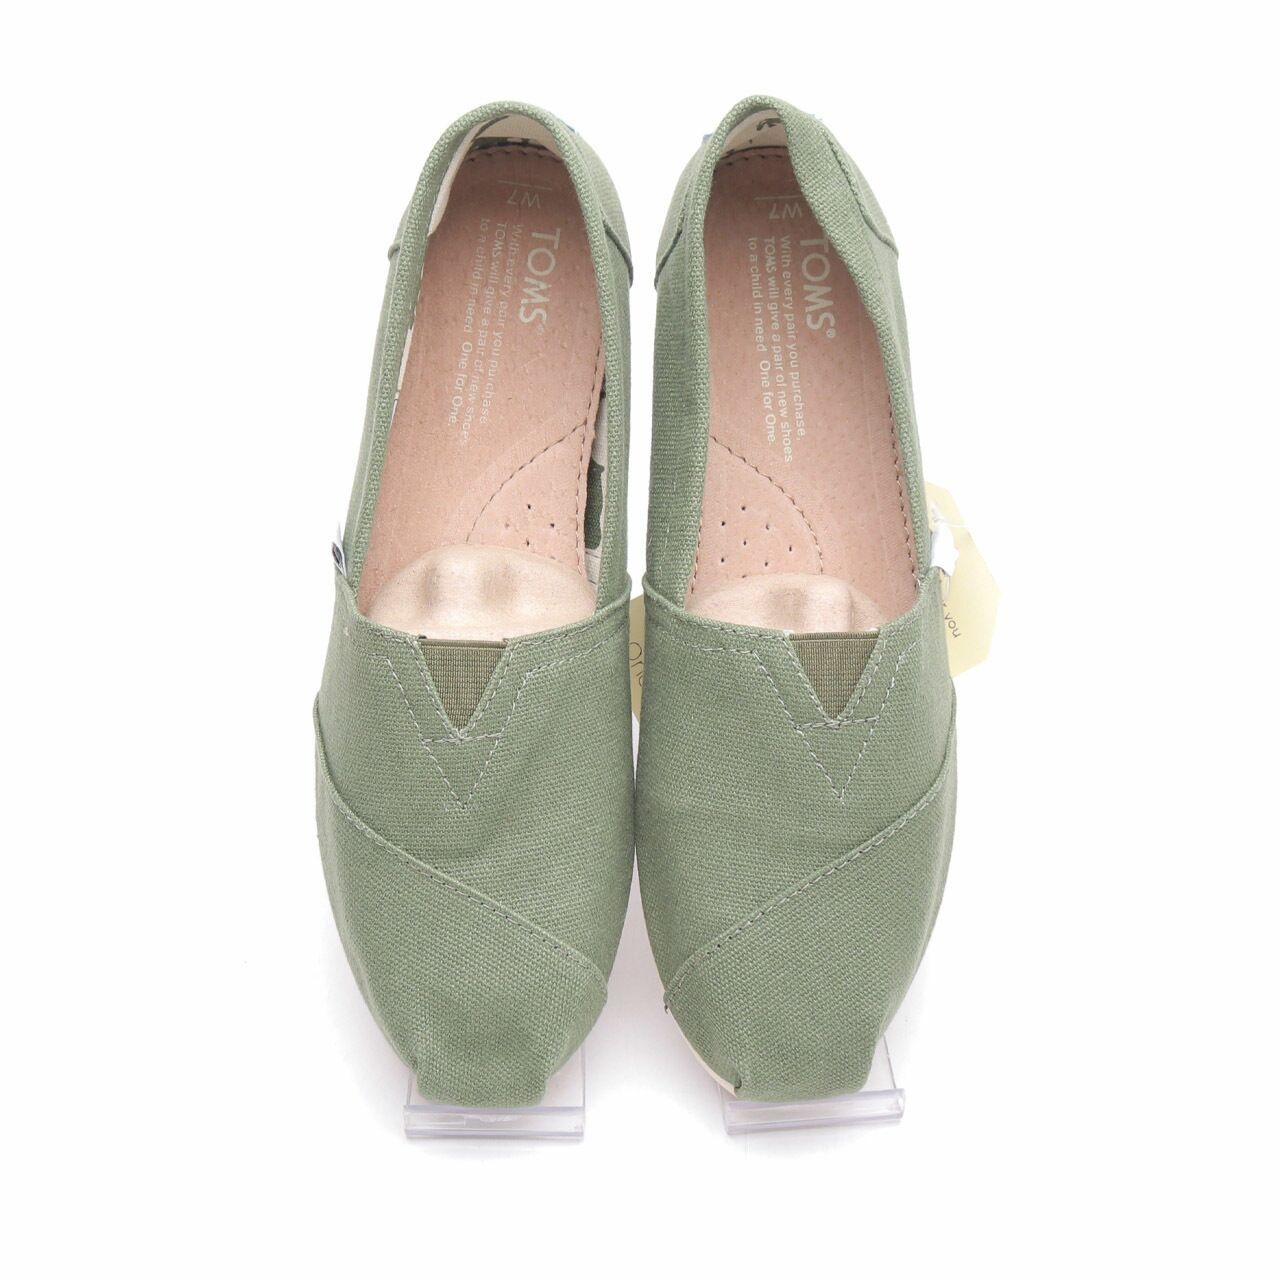 Toms Classic Olive Canvas Slip On Flats